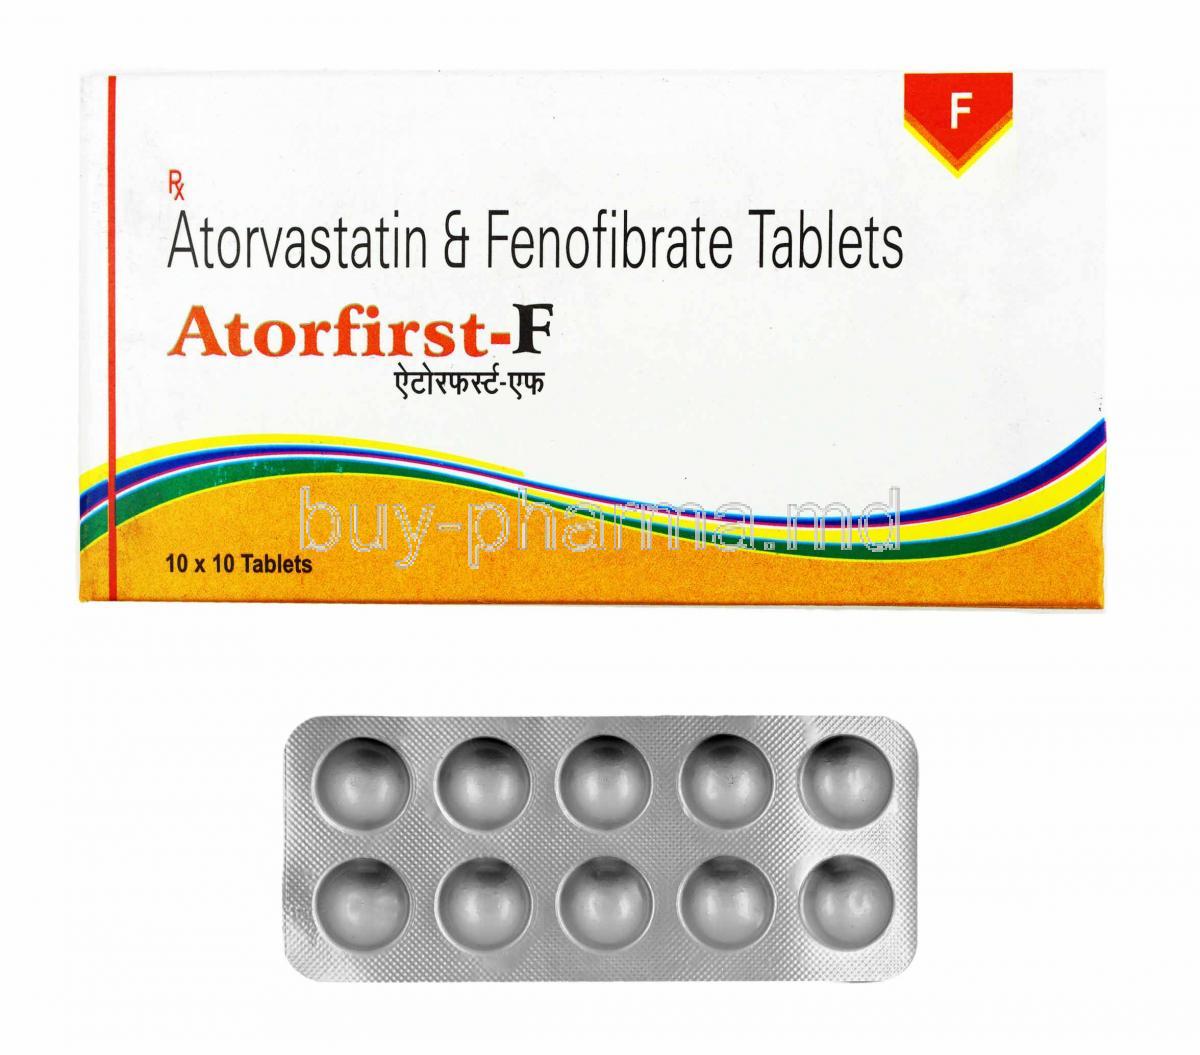 Atorfirst-F, Atorvastatin and Fenofibrate box and tablets